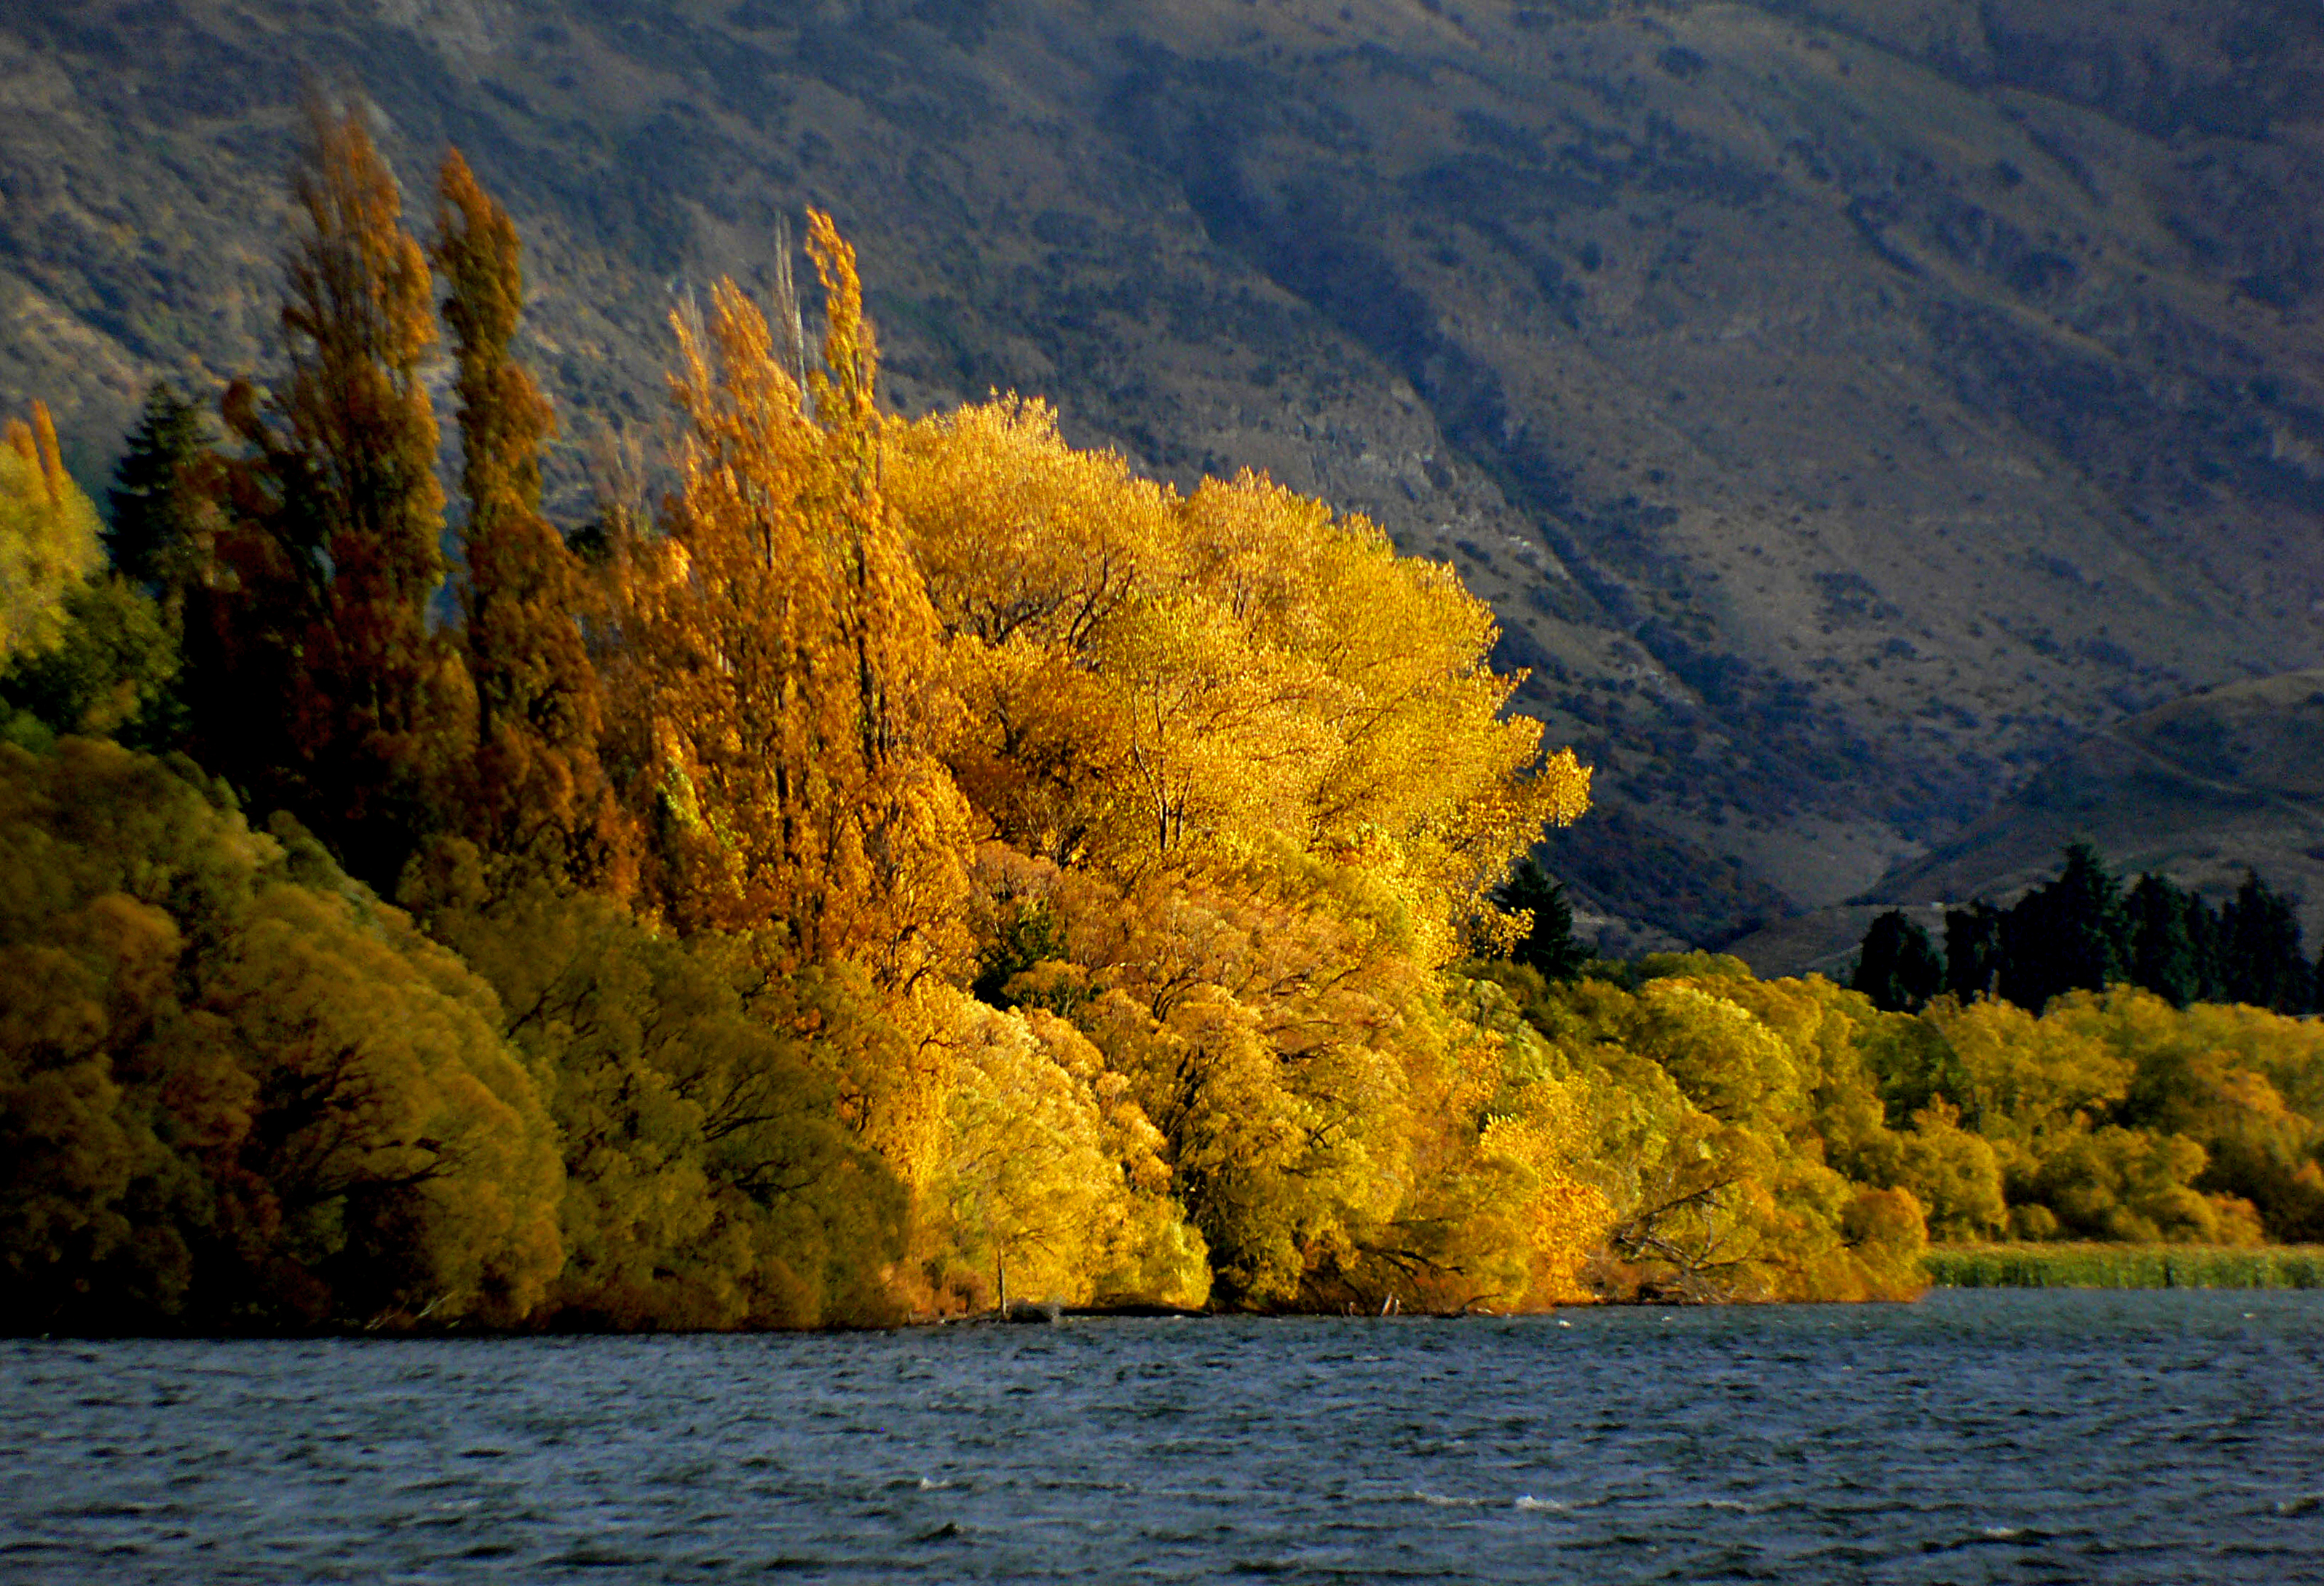 File:A golden tree during the golden season.JPG - Wikimedia Commons